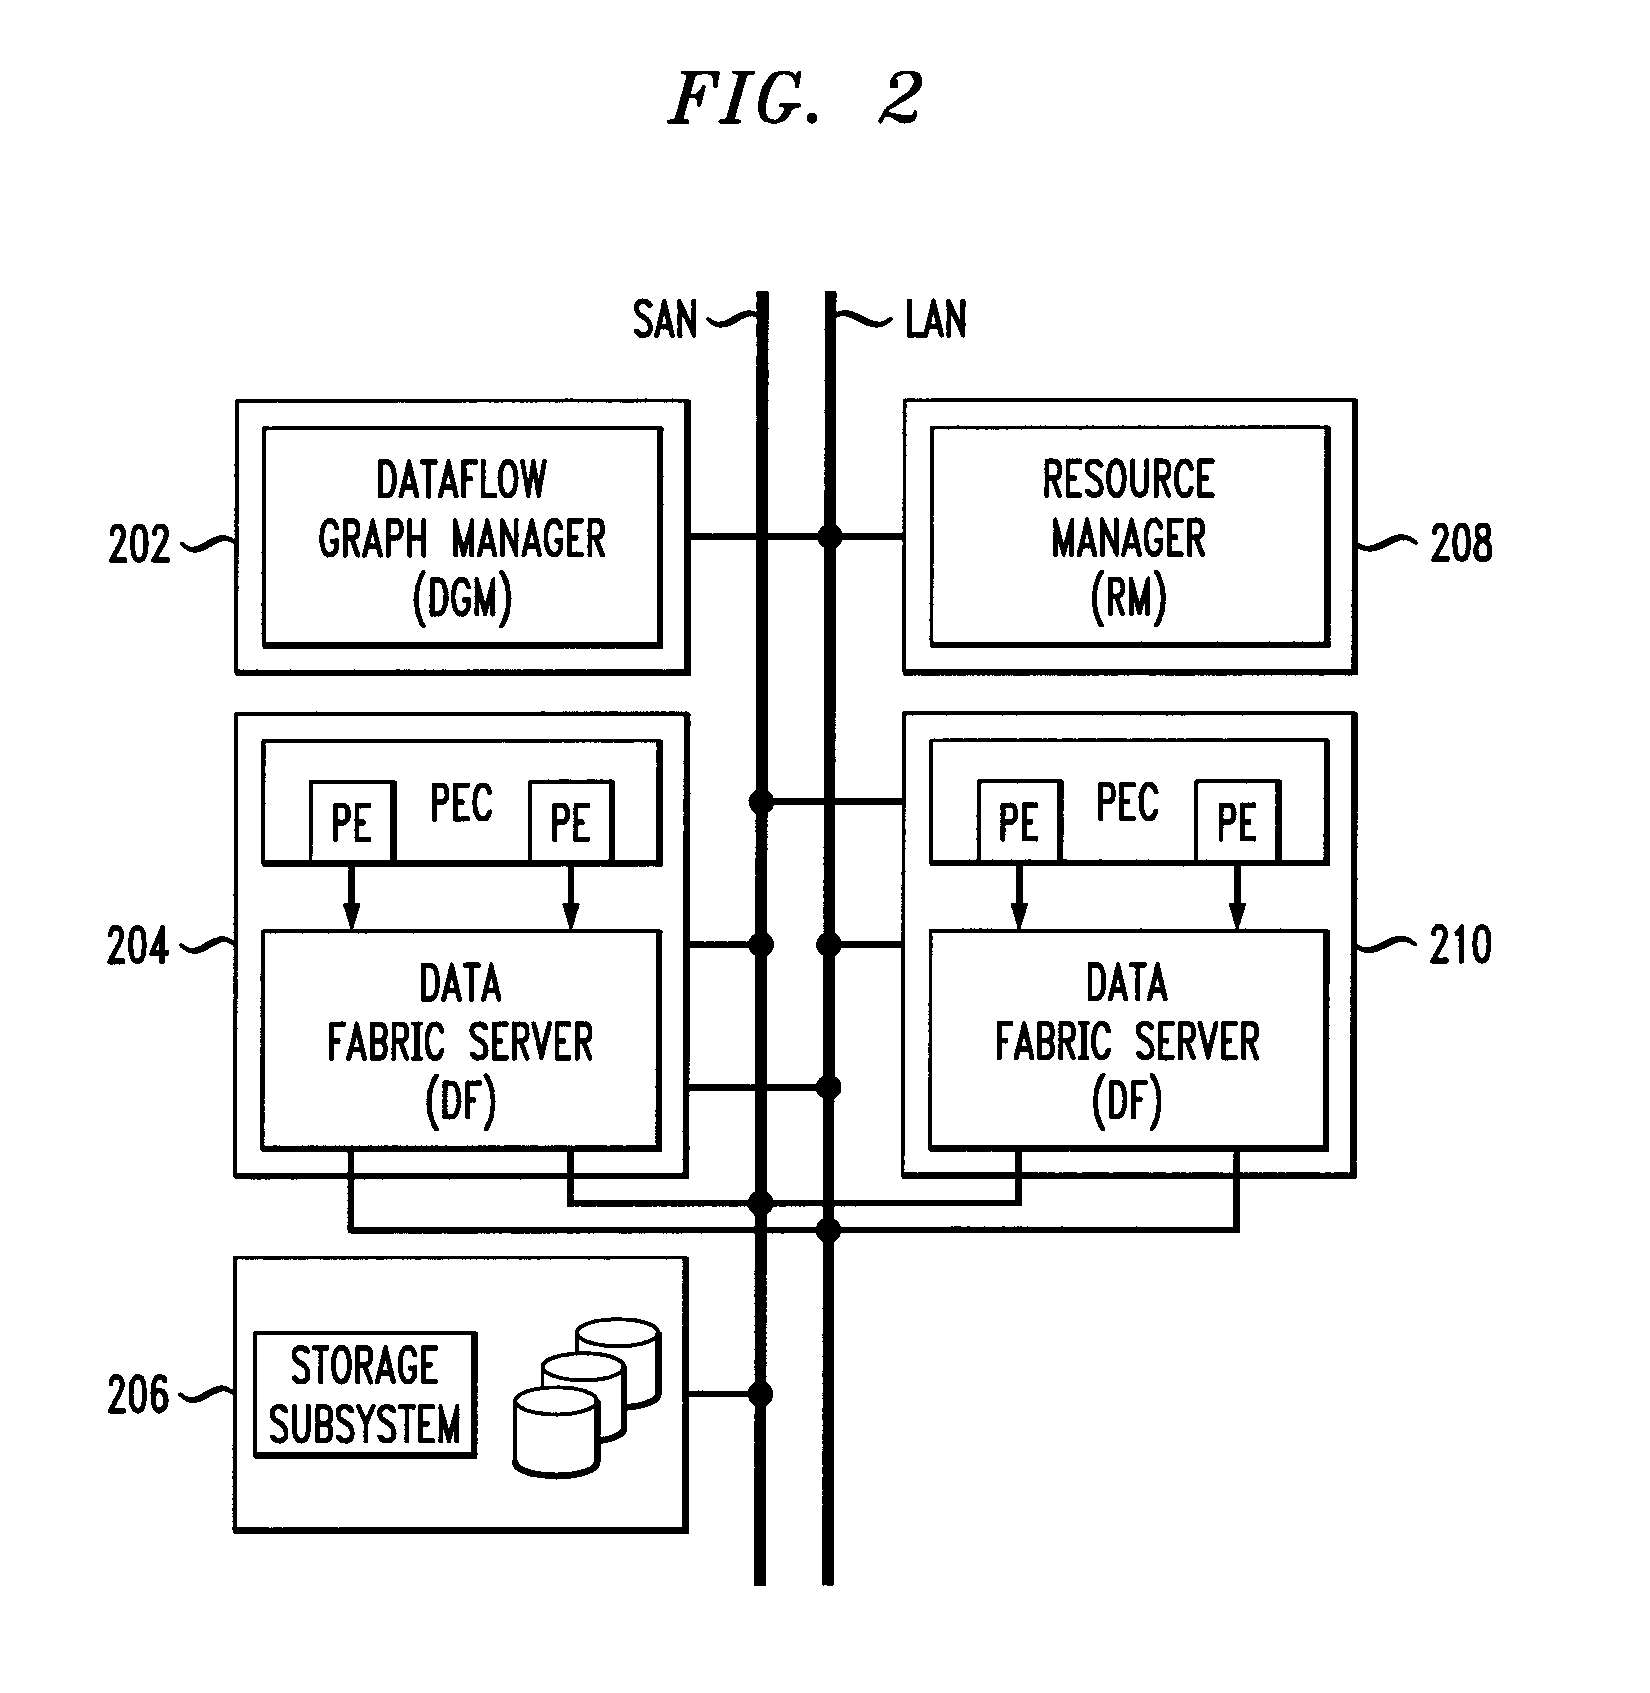 Generating a Distributed Stream Processing Application